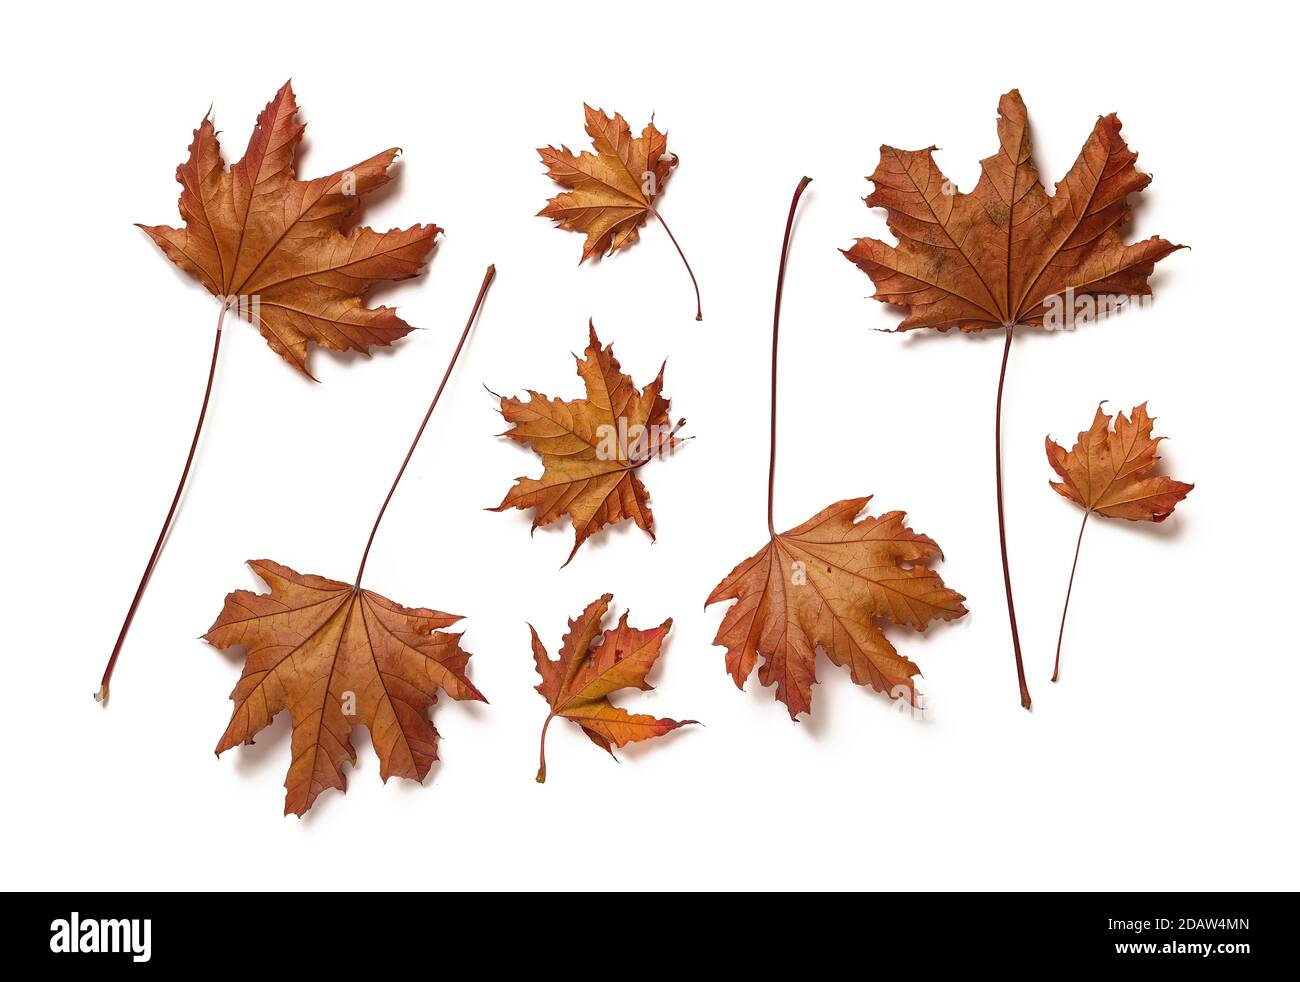 Underside of purple leaves of royal red maple tree leaves or acer platanoides isolated on white background. Set of autumn leaves as a design element. Stock Photo